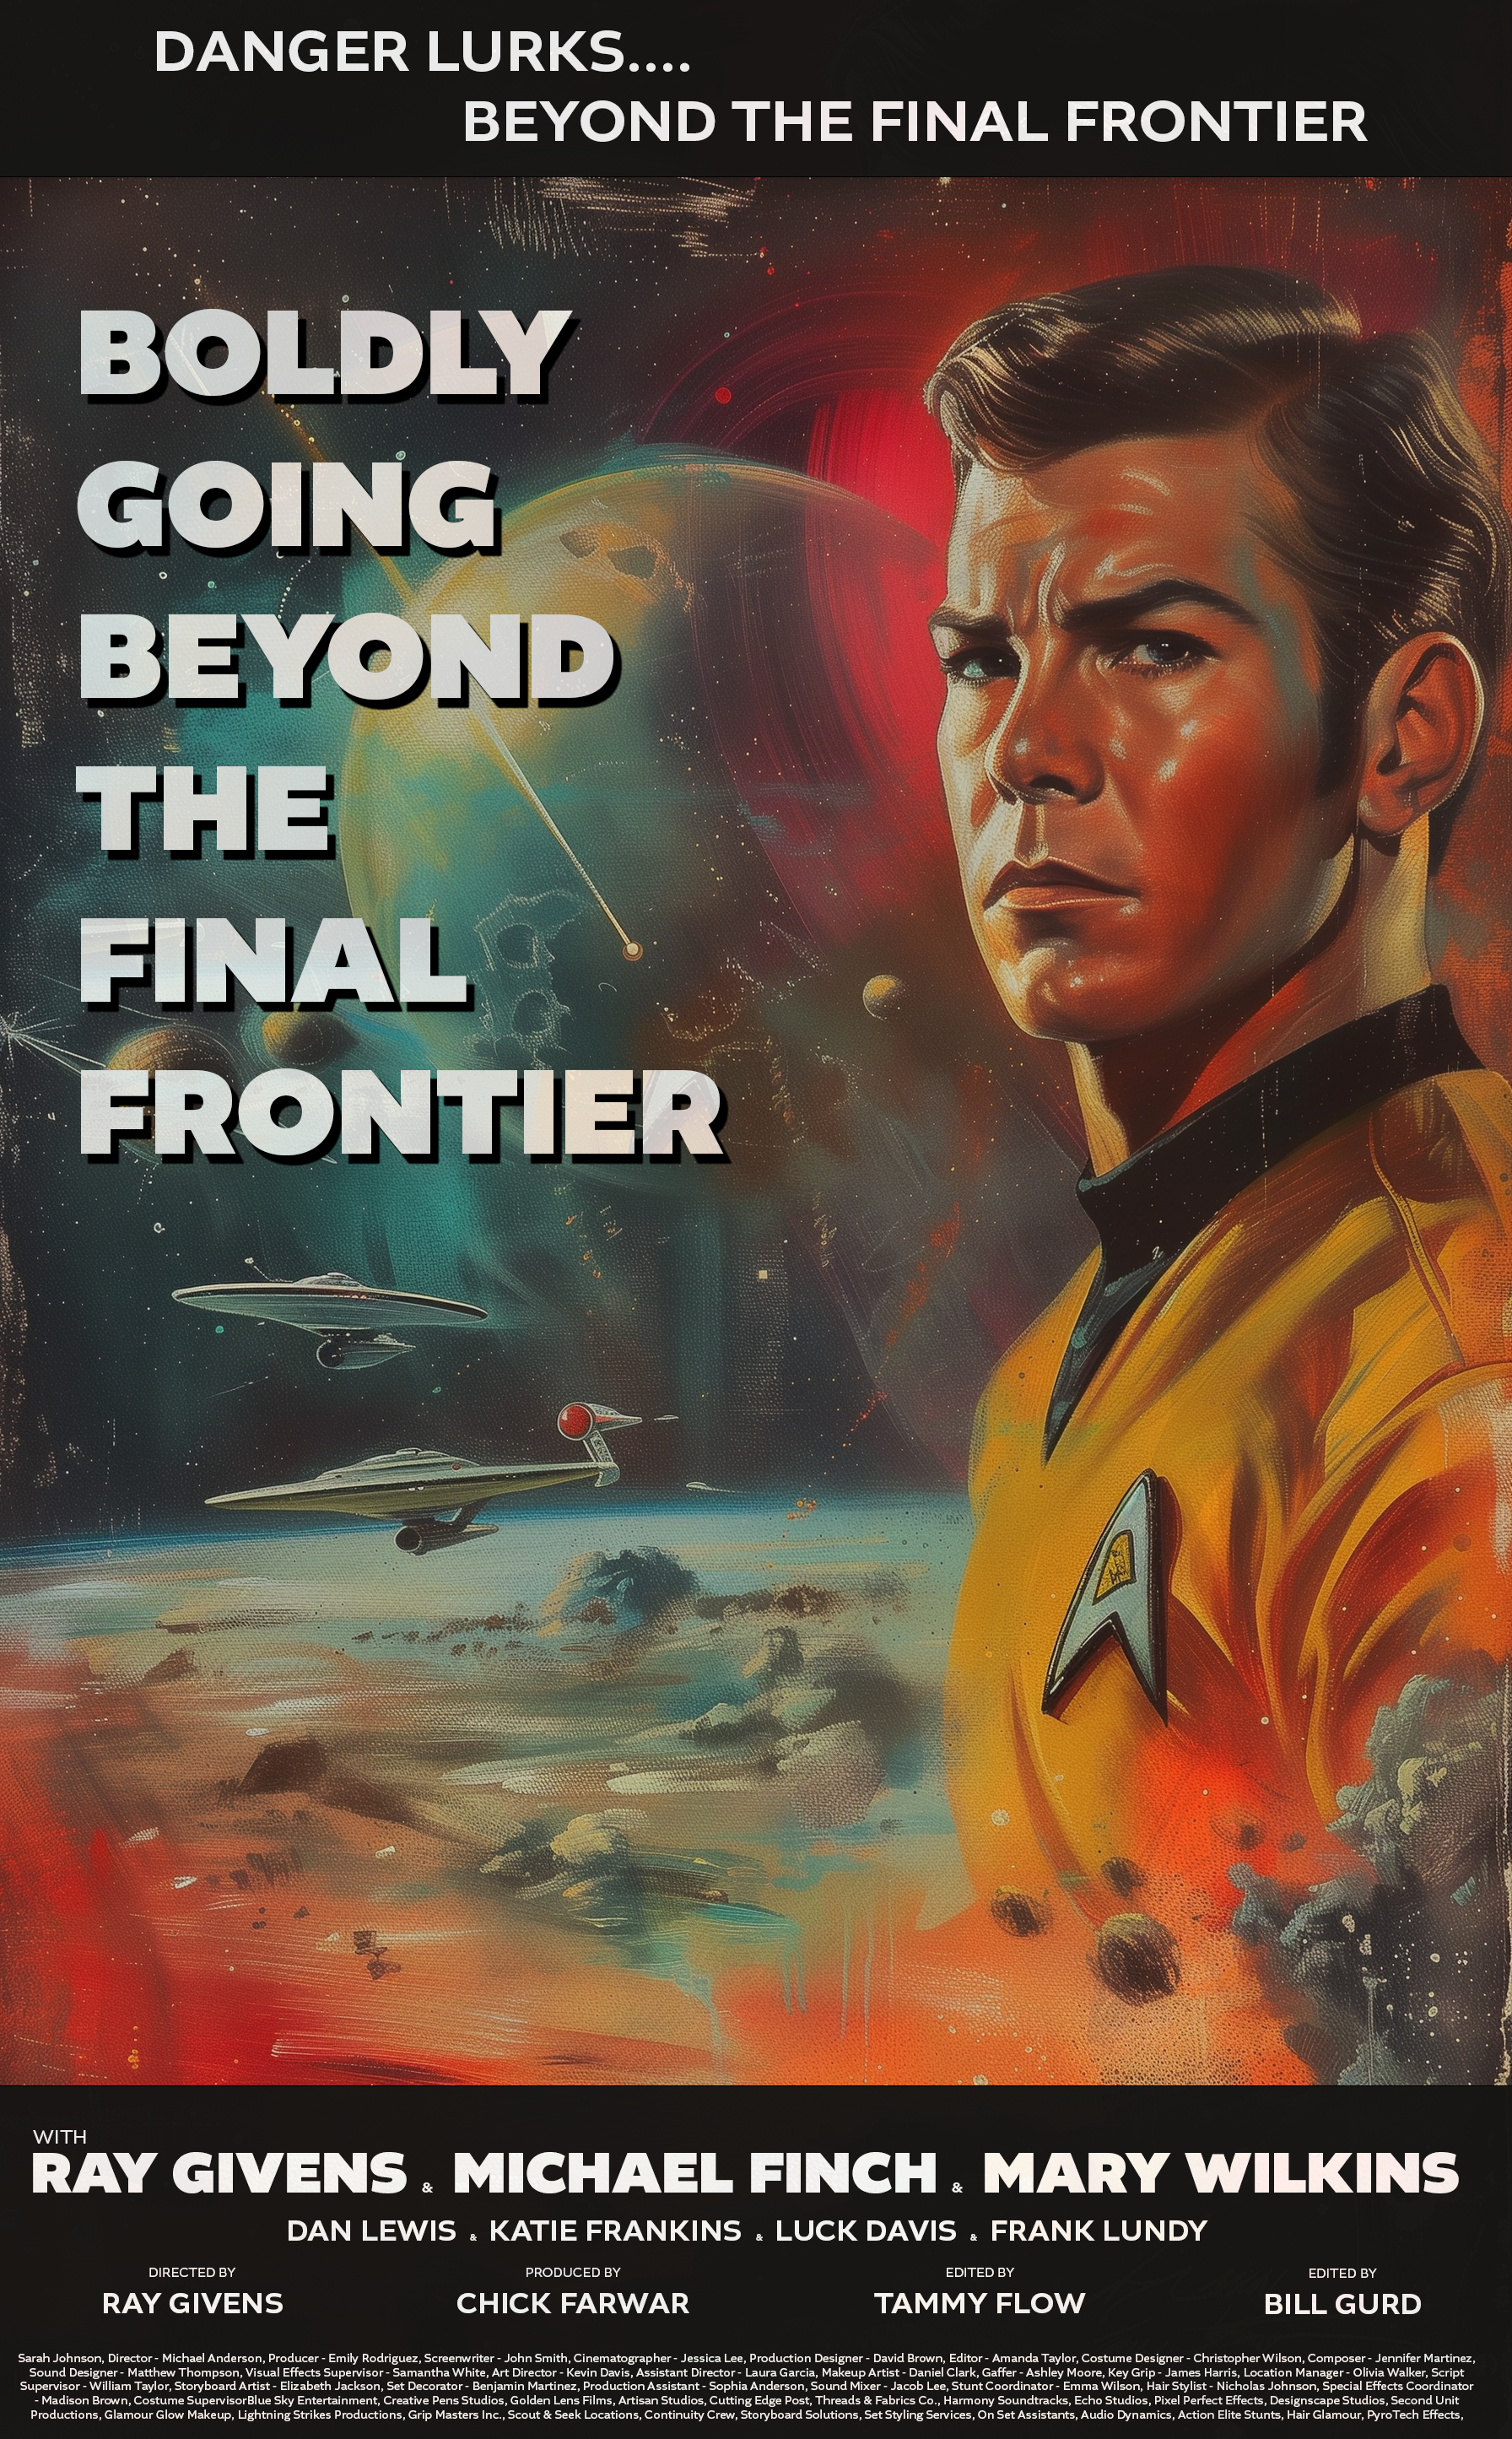 Name:  Beyond the Final Frontier.png
Views: 168
Size:  8.19 MB